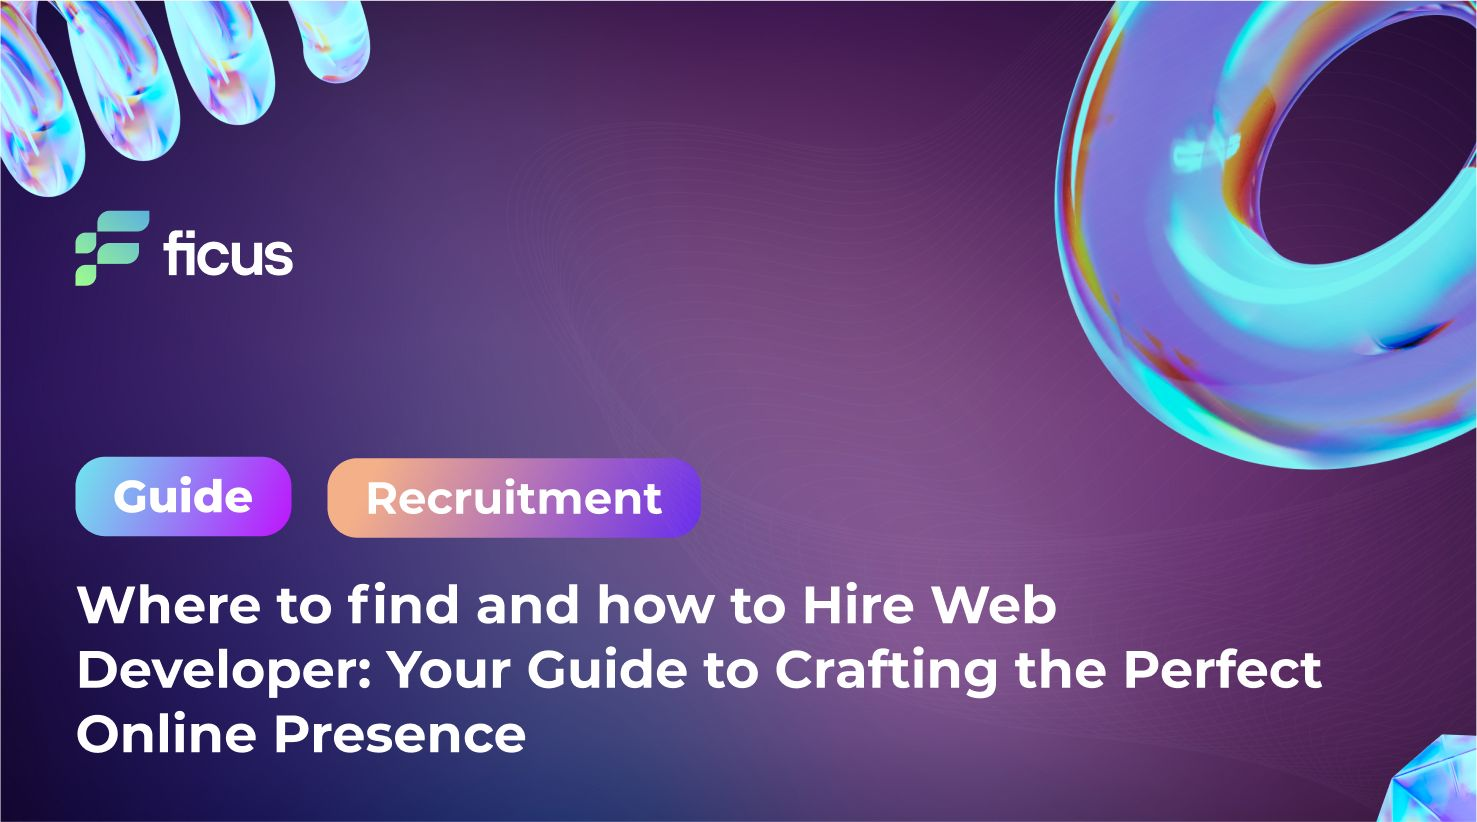 Where to find and how to Hire Web Developer: Your Guide to Crafting the Perfect Online Presence